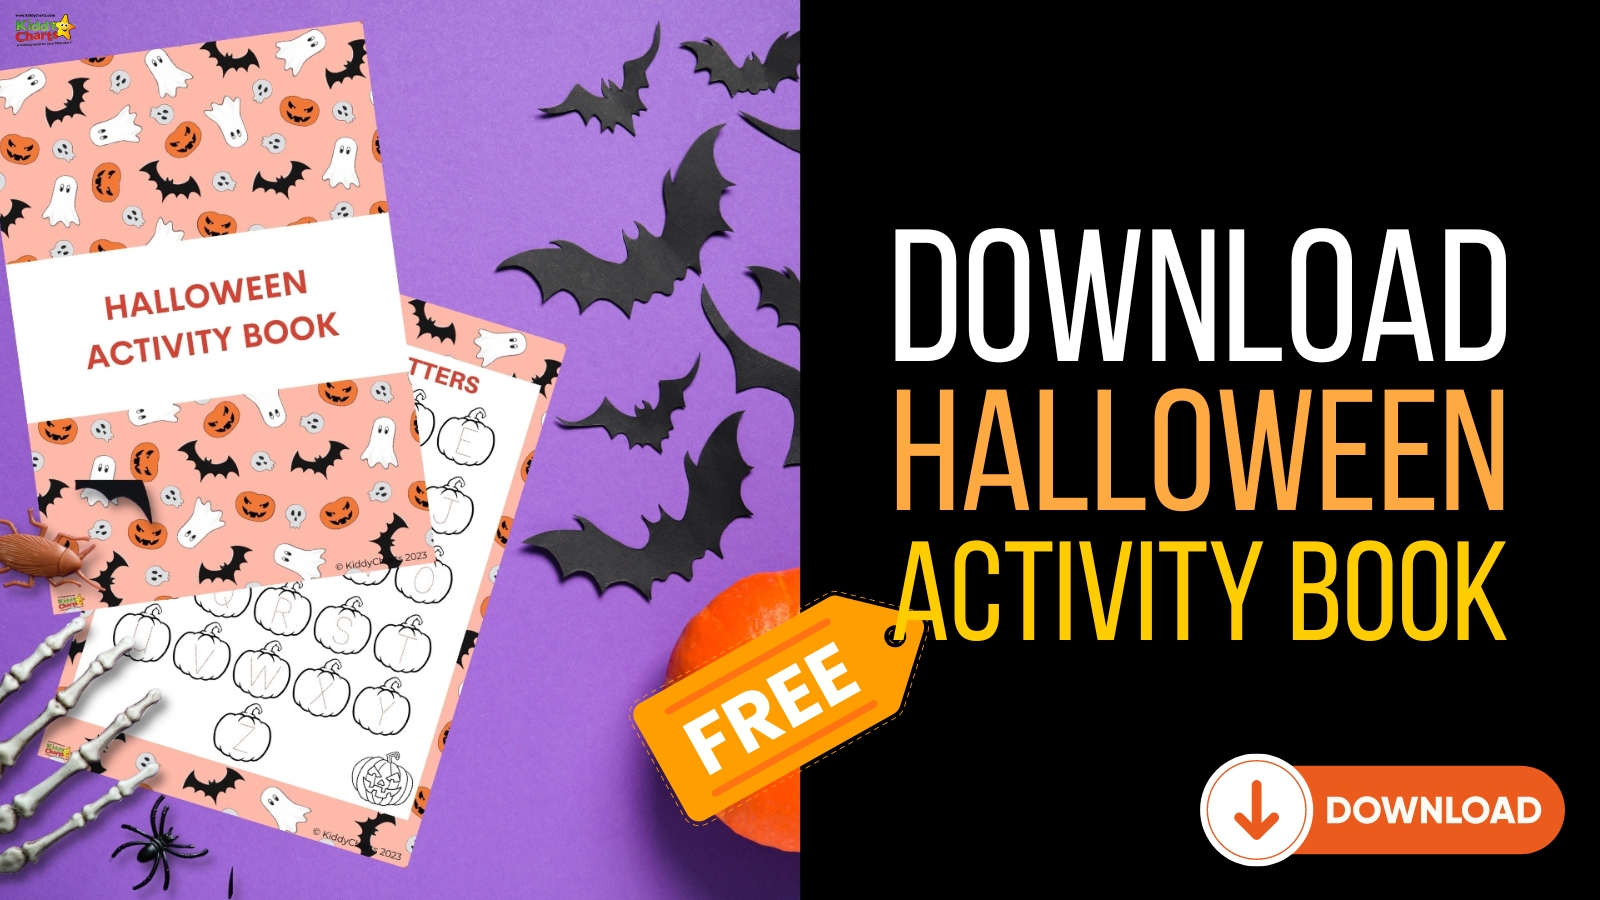 Download our Halloween wordsearch and Halloween activity book today!